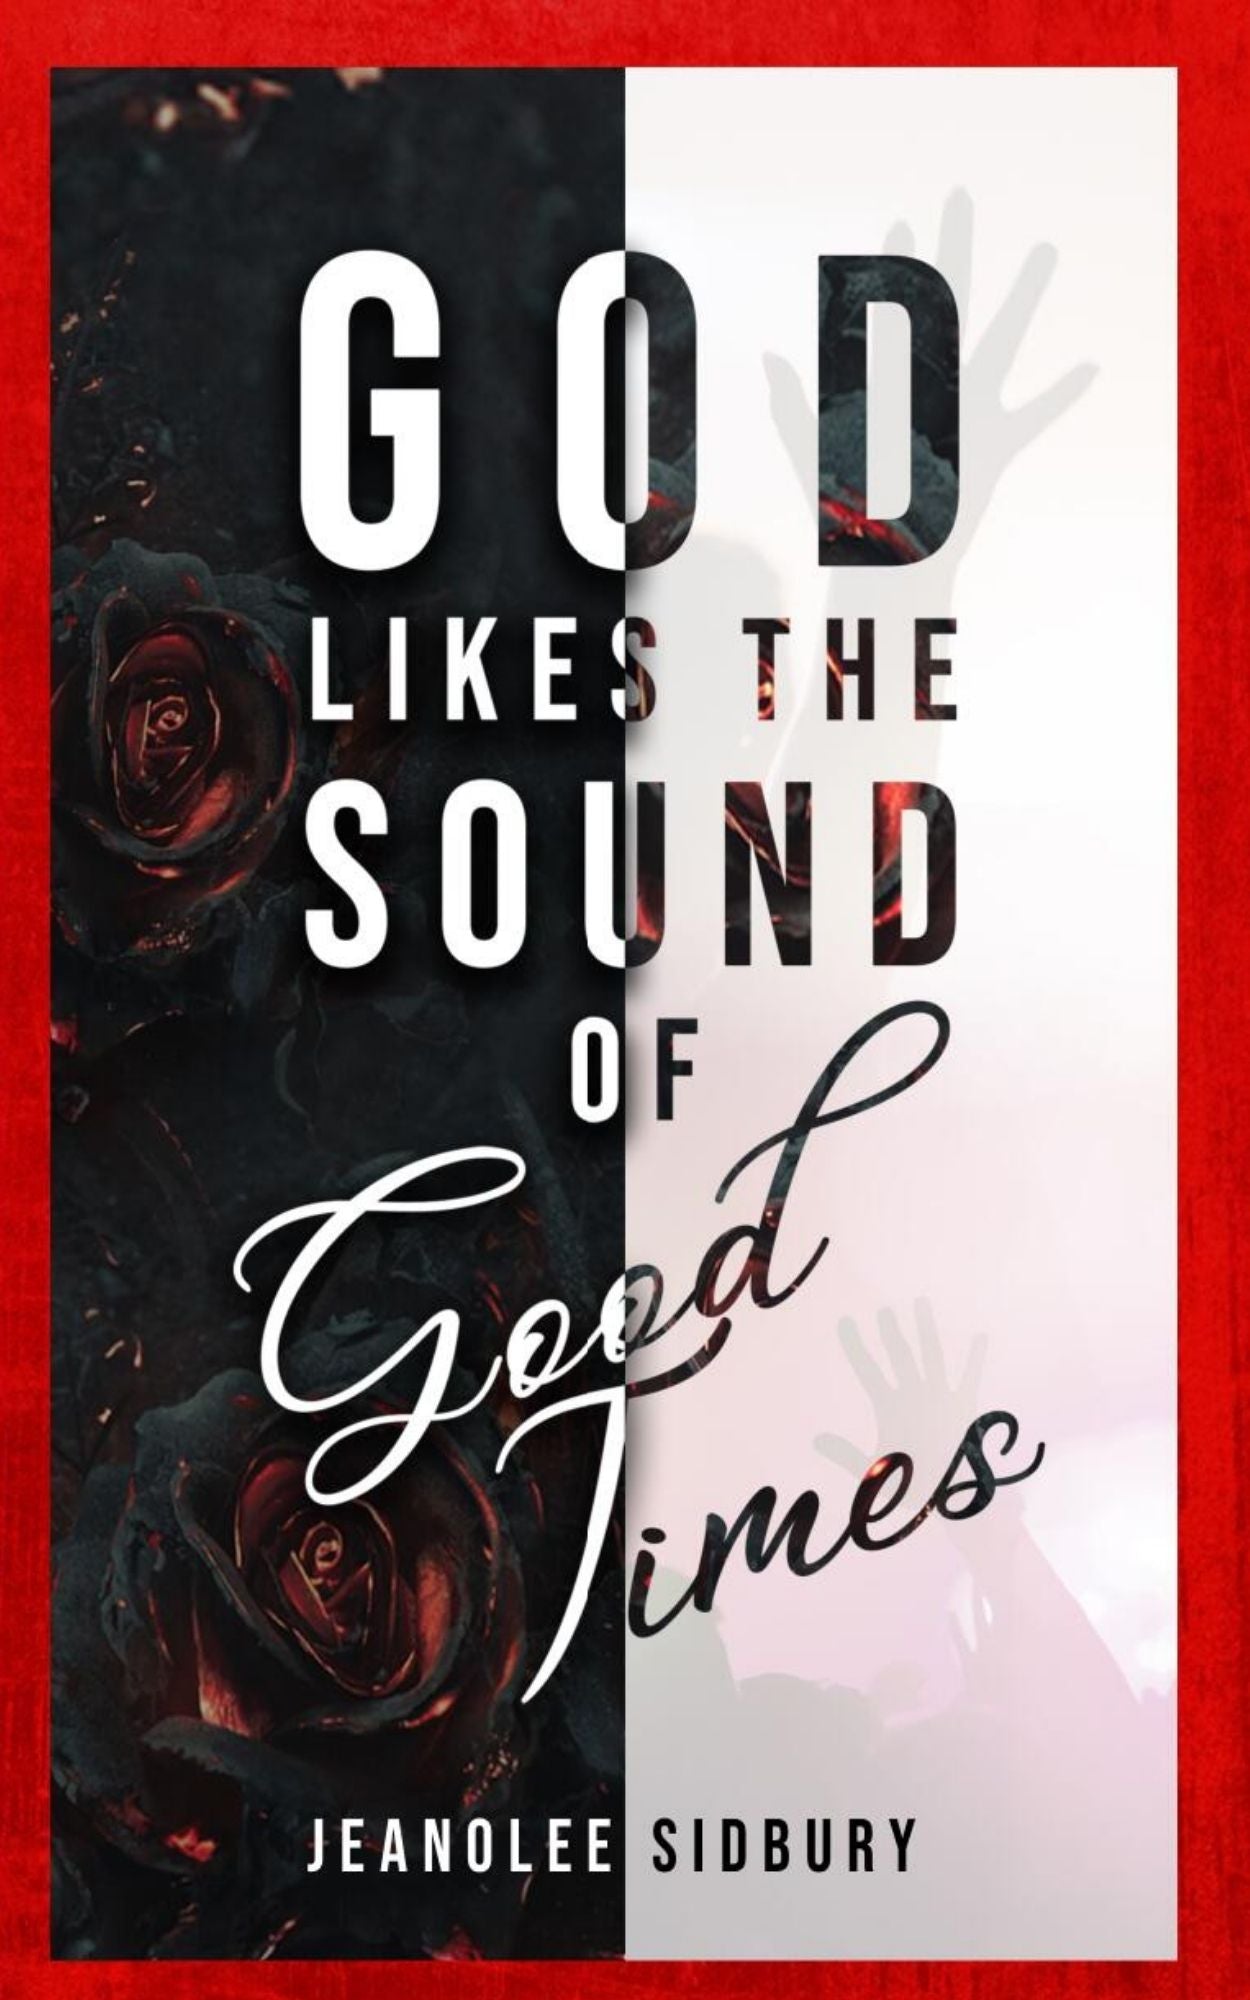 God Likes the Sound of Good Times (The story behind the brand)